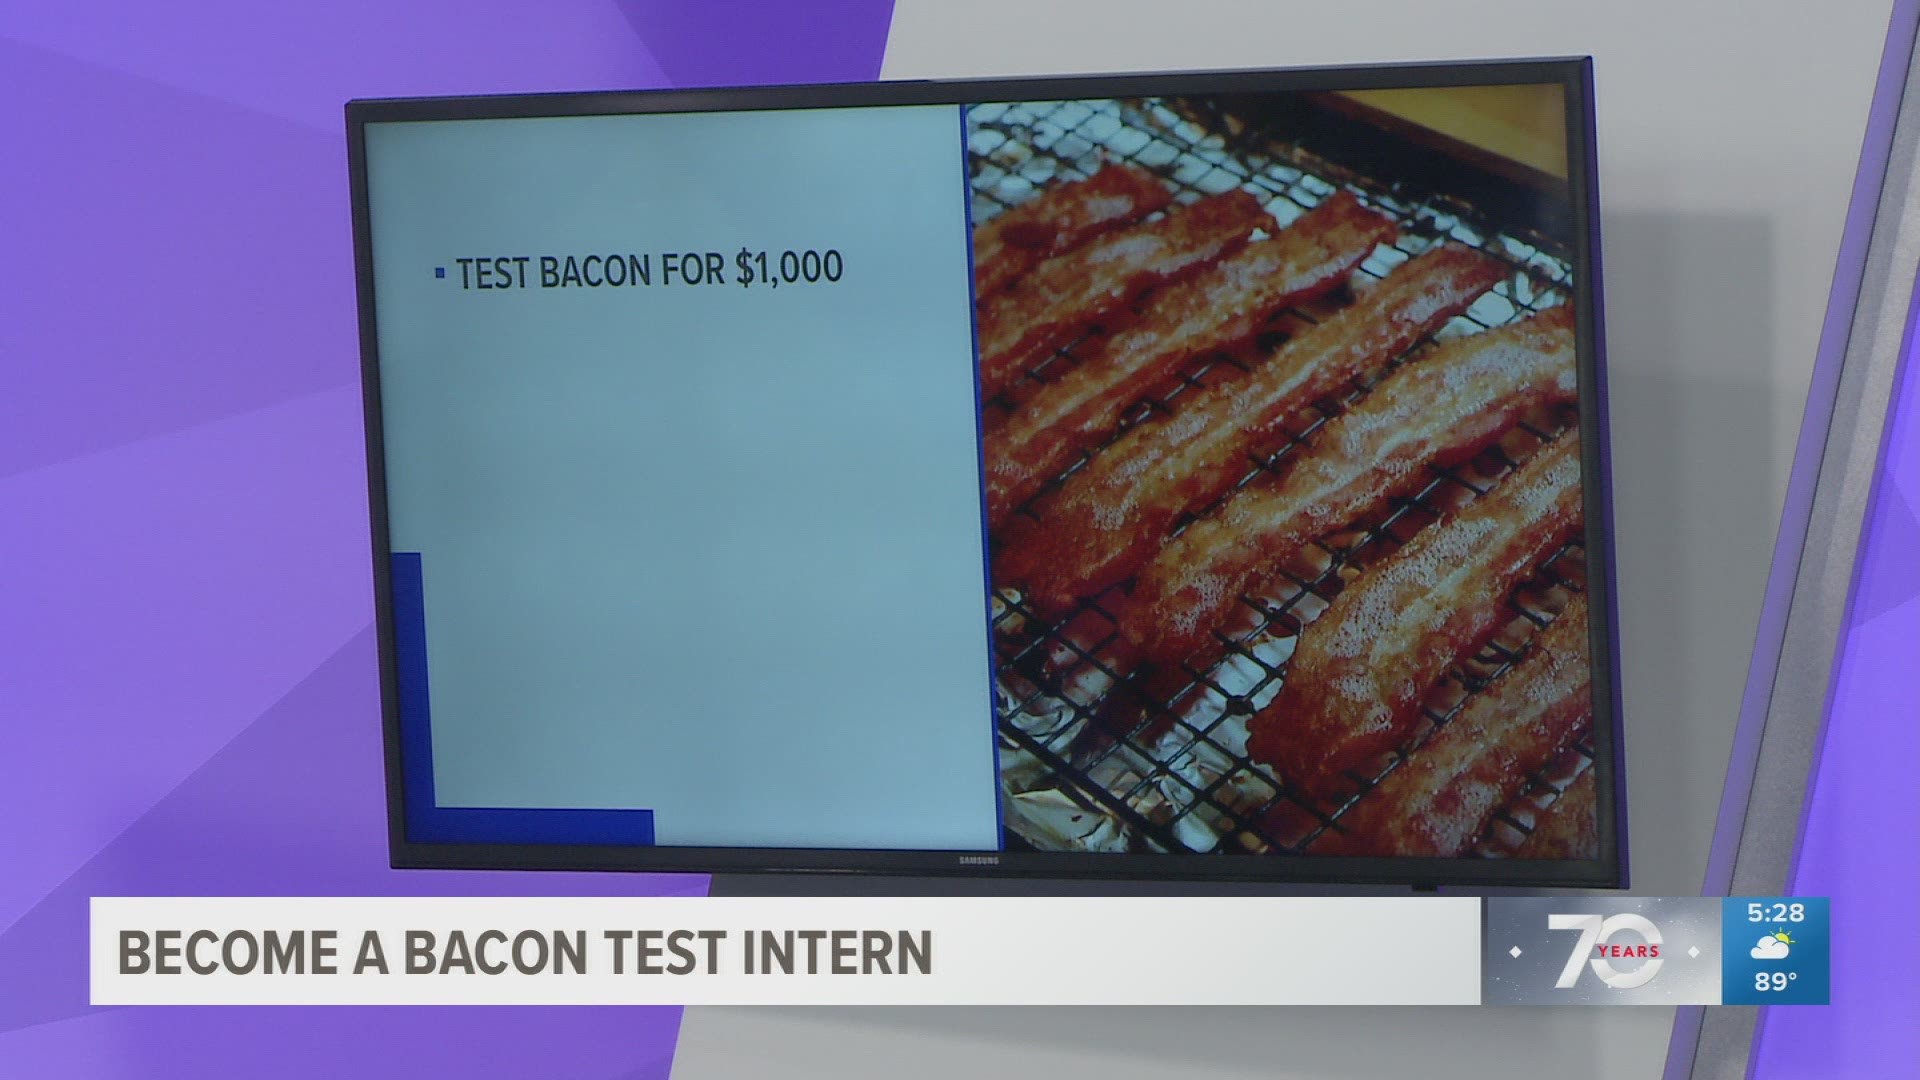 The company Farmer Boys is looking for a brand new intern to test various bacon products